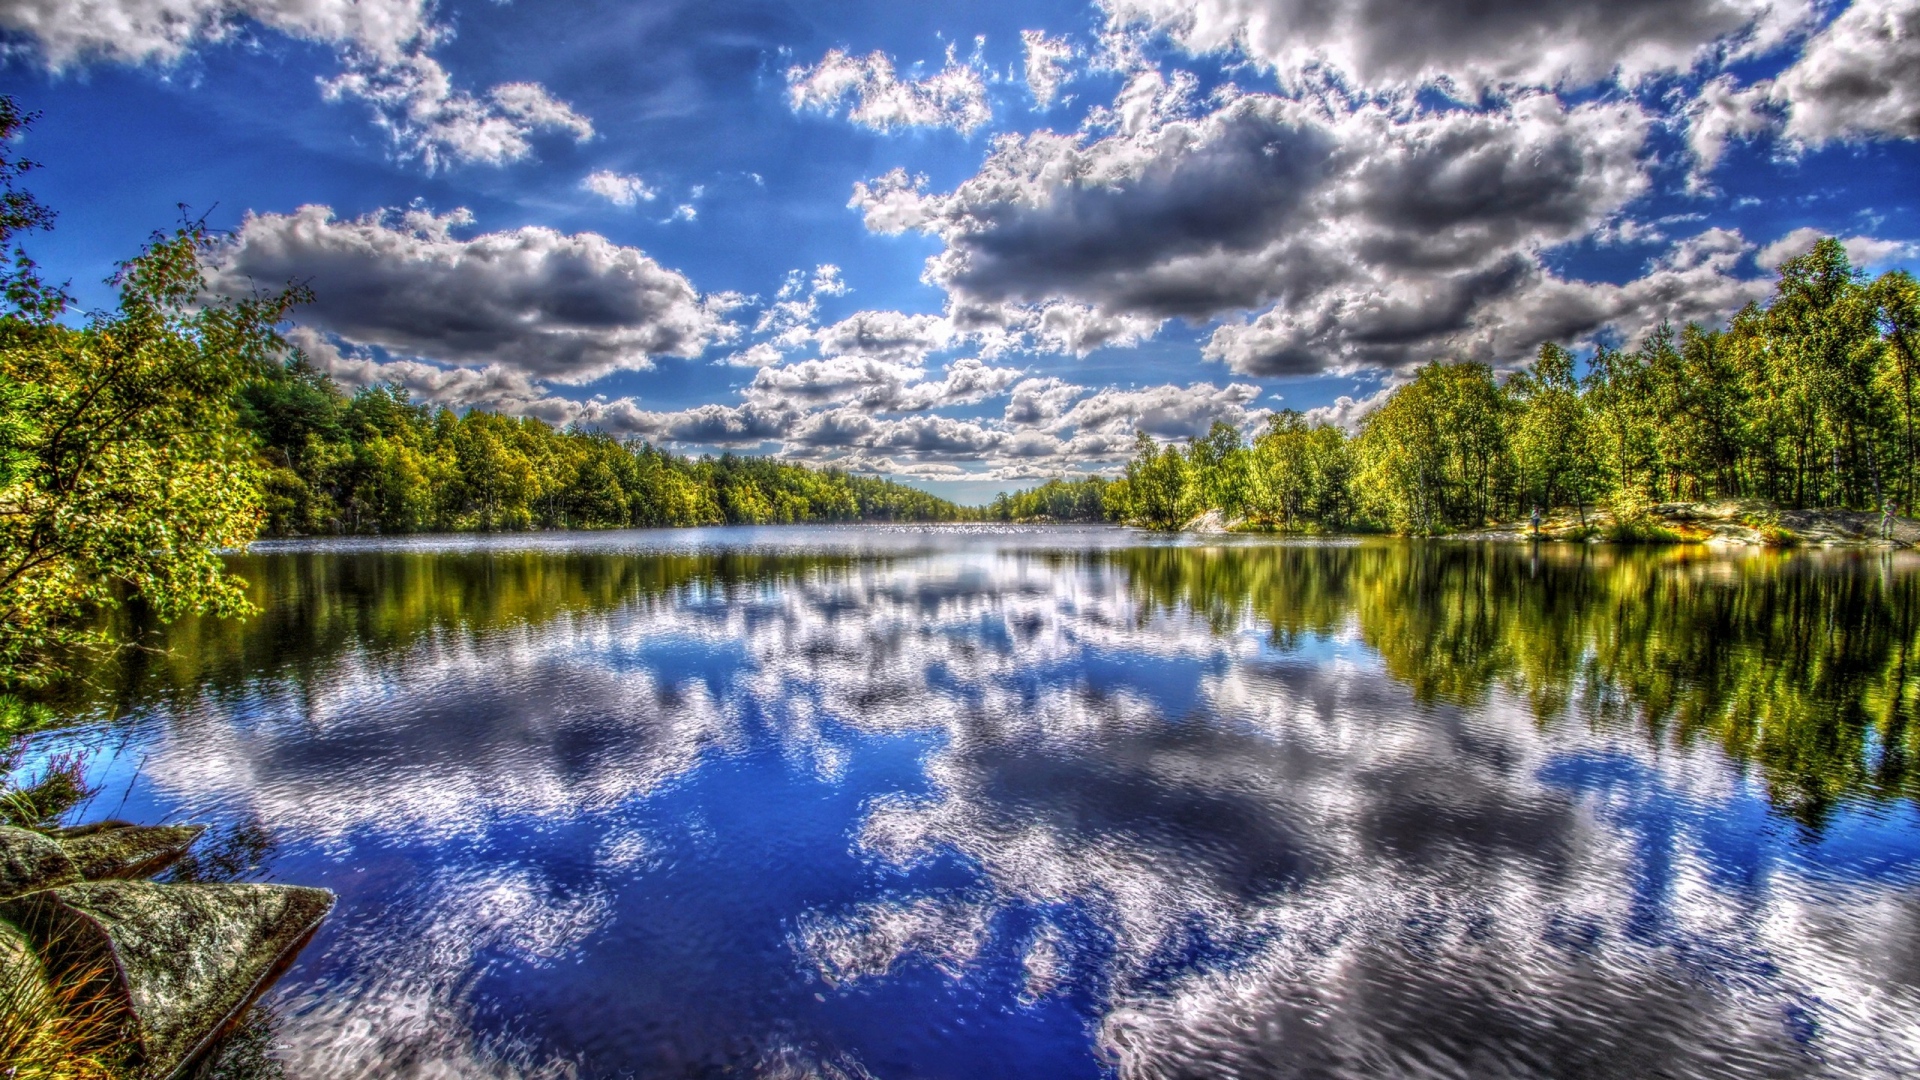 Wallpaper River Summer Trees Sky Clouds HDr